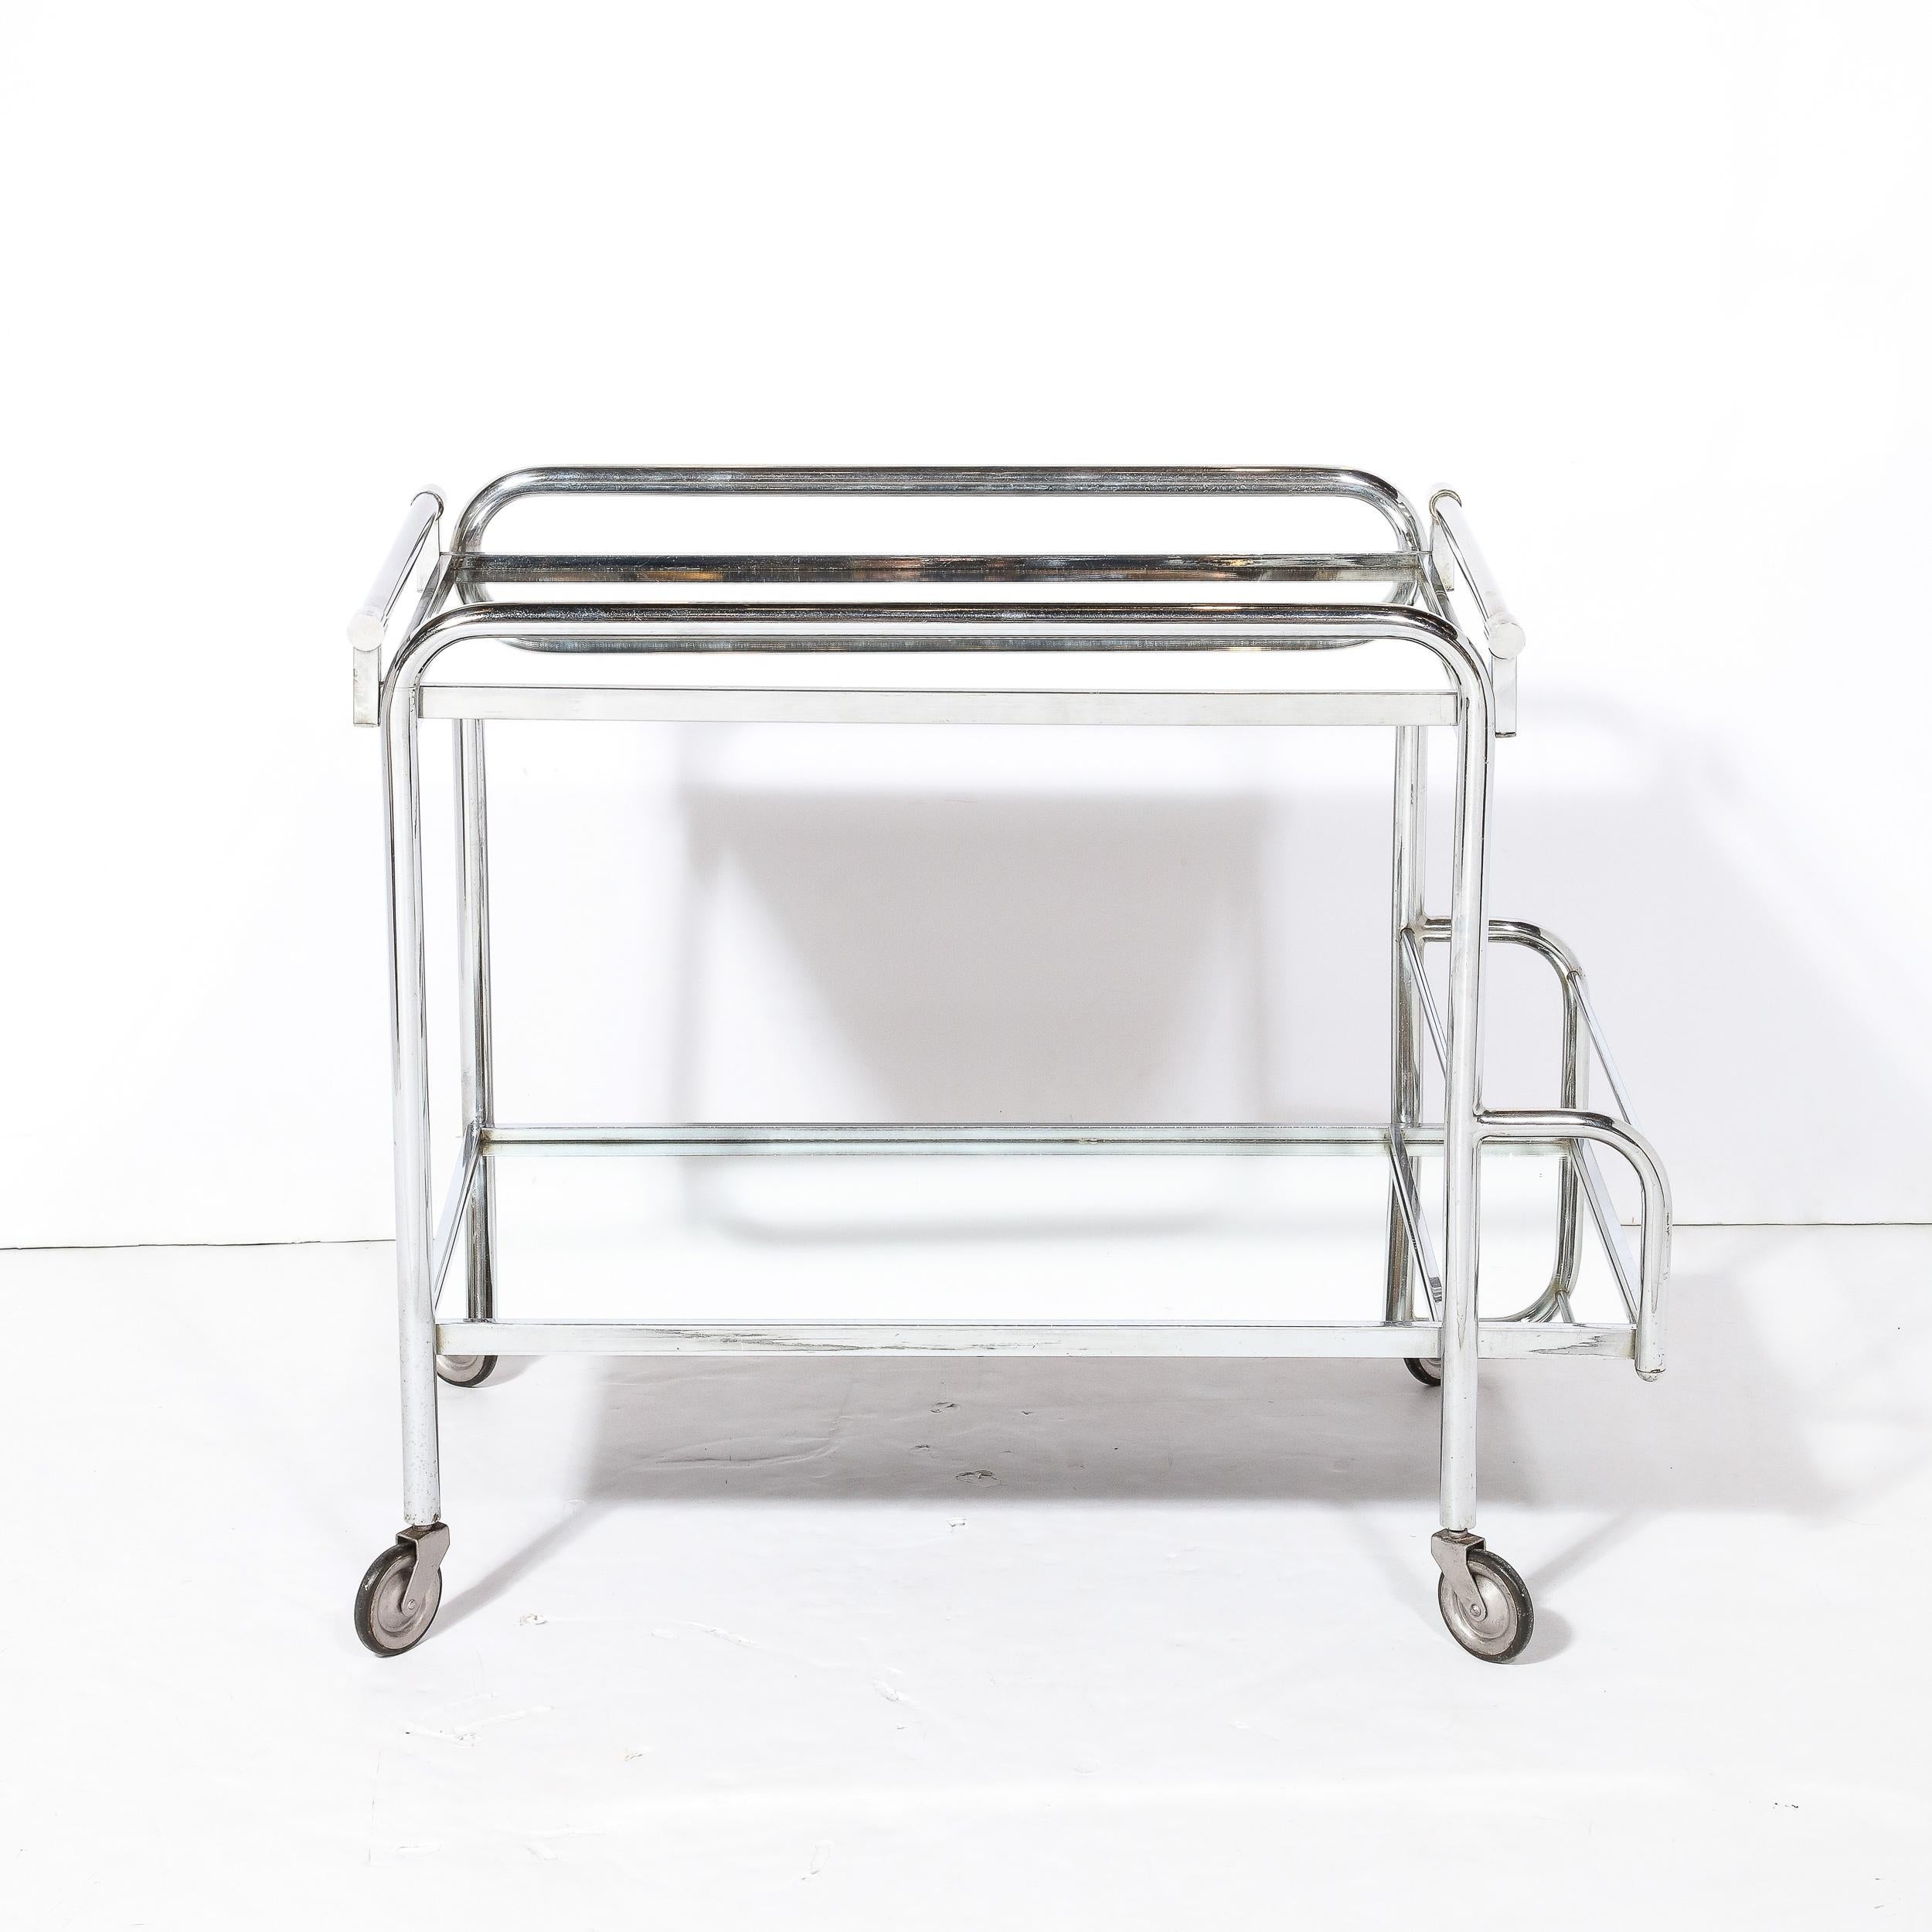 Art Deco Two-Tier Bar Cart in Polished Chrome and Mirror Glass by Jacques Adnet  For Sale 9